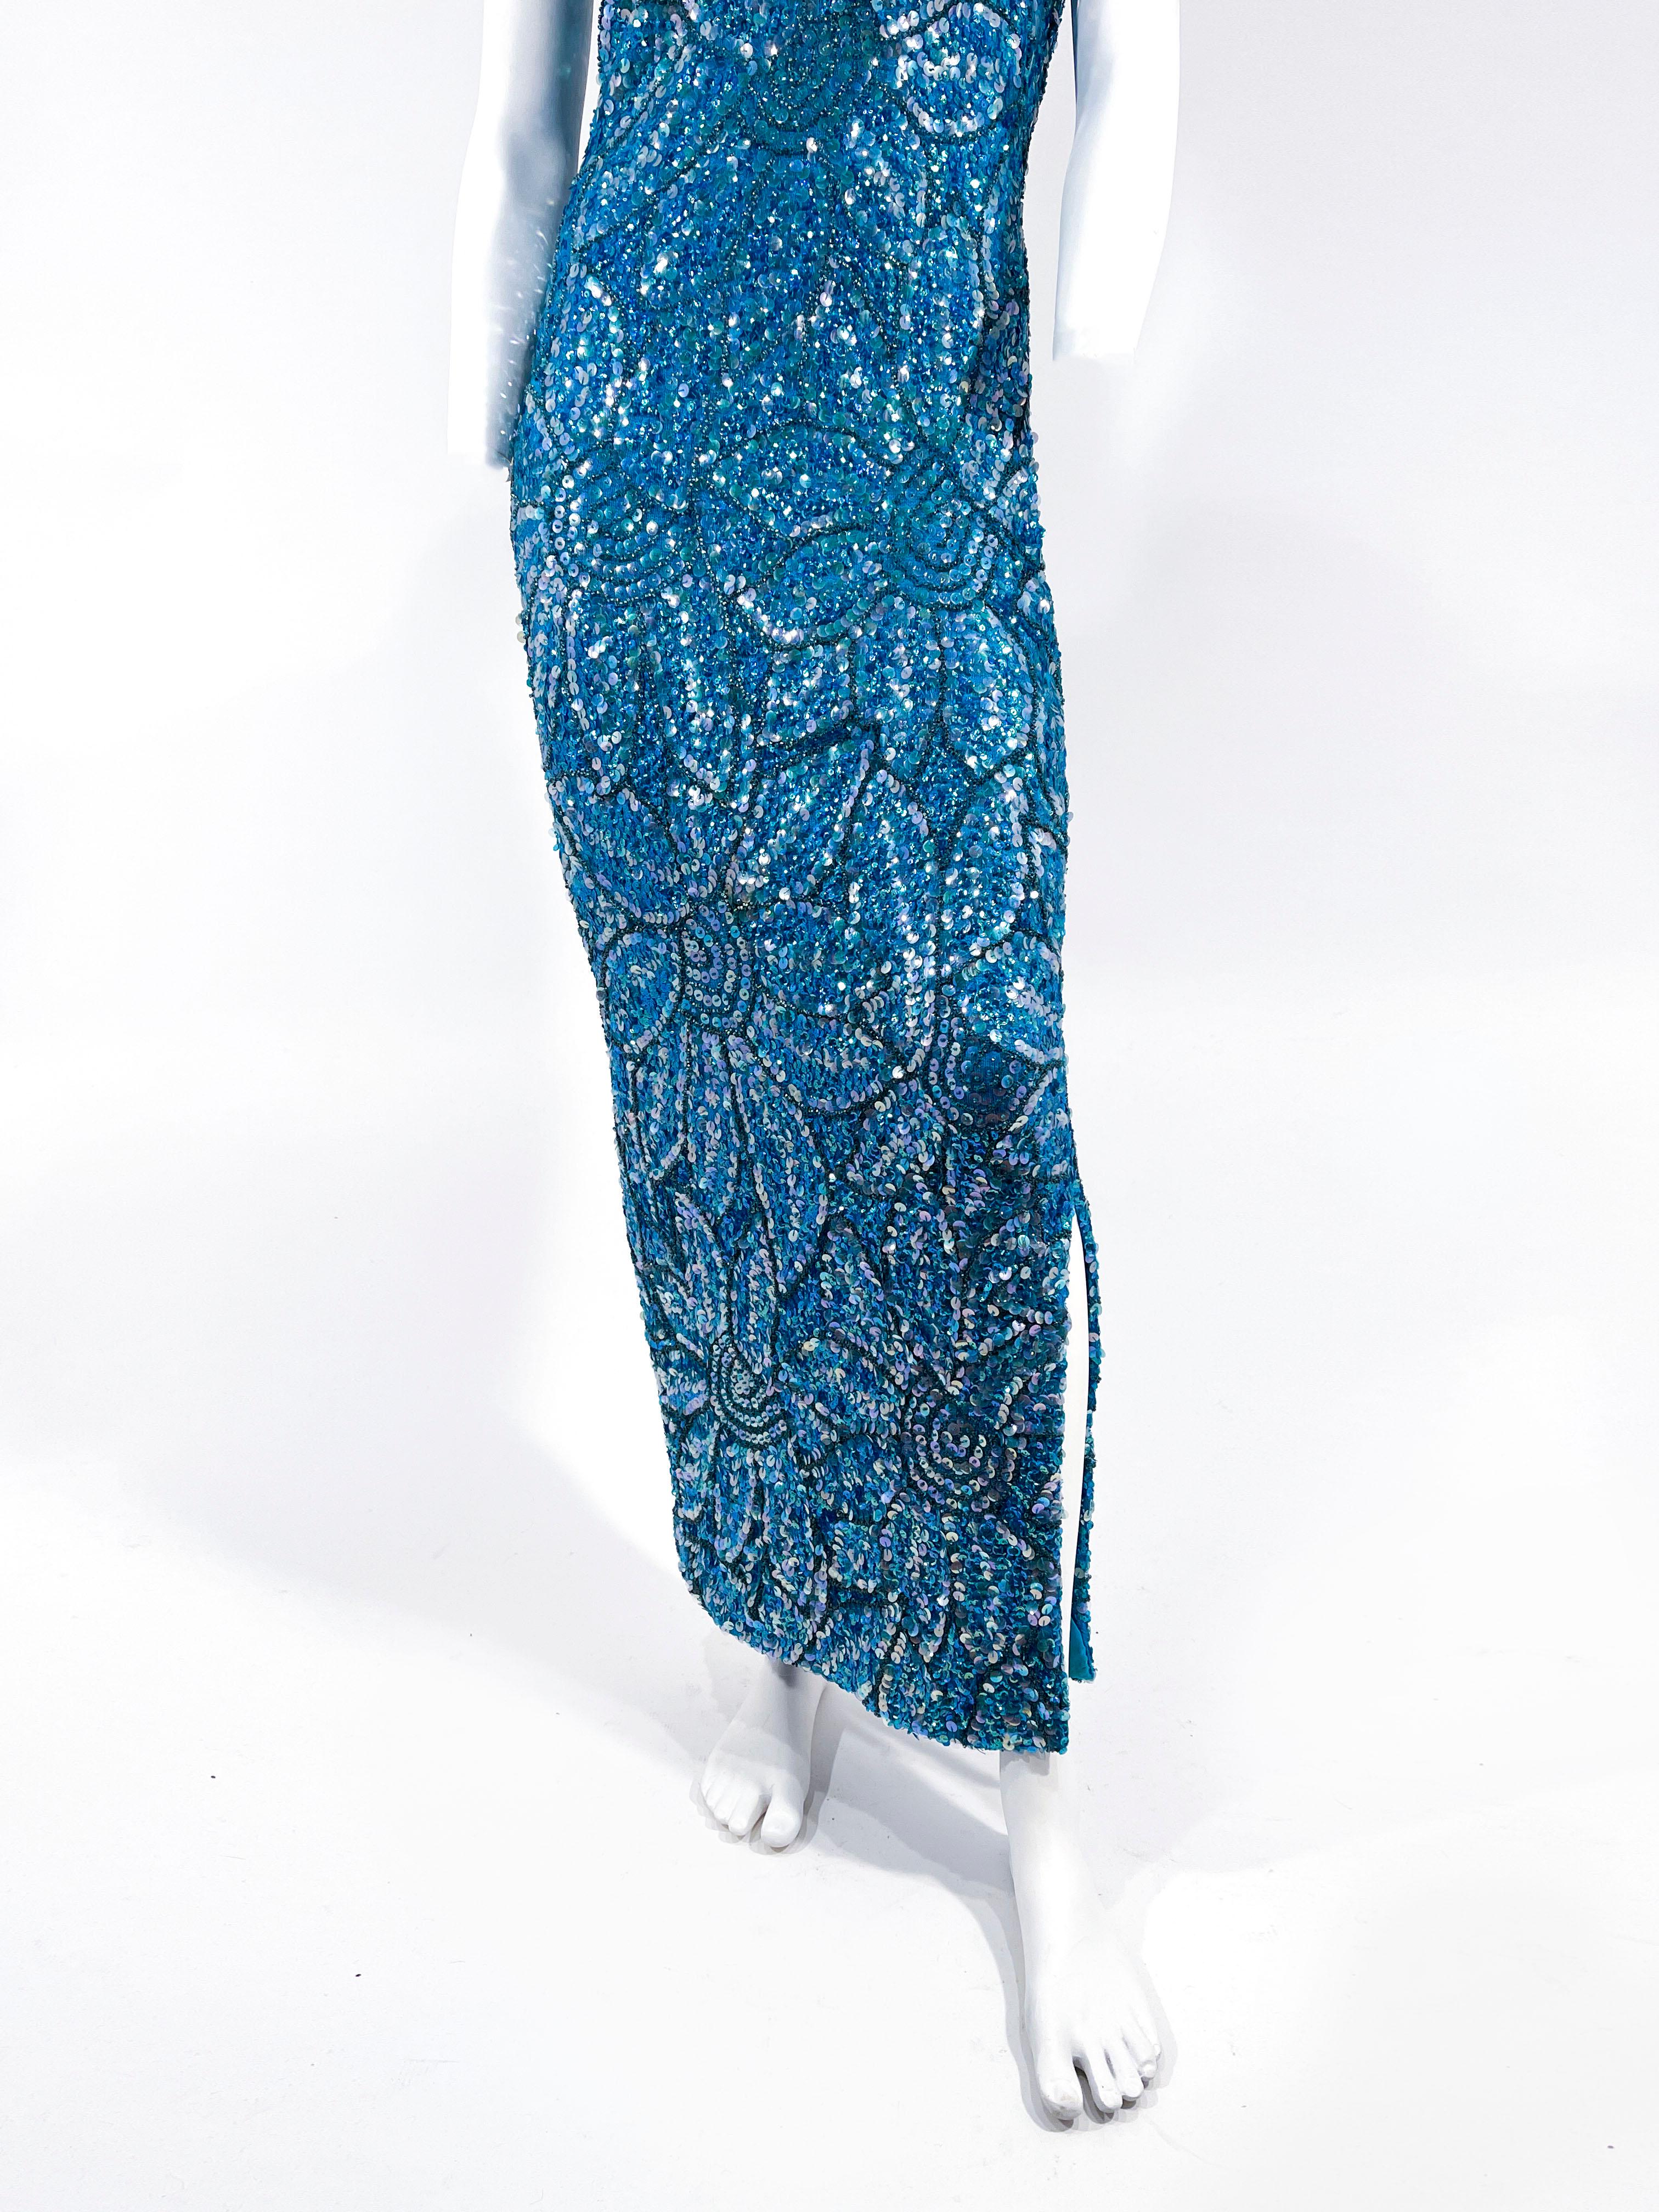 1950s Imperial Aqua Blue Sequin and Beaded Knit Dress In Good Condition For Sale In San Francisco, CA